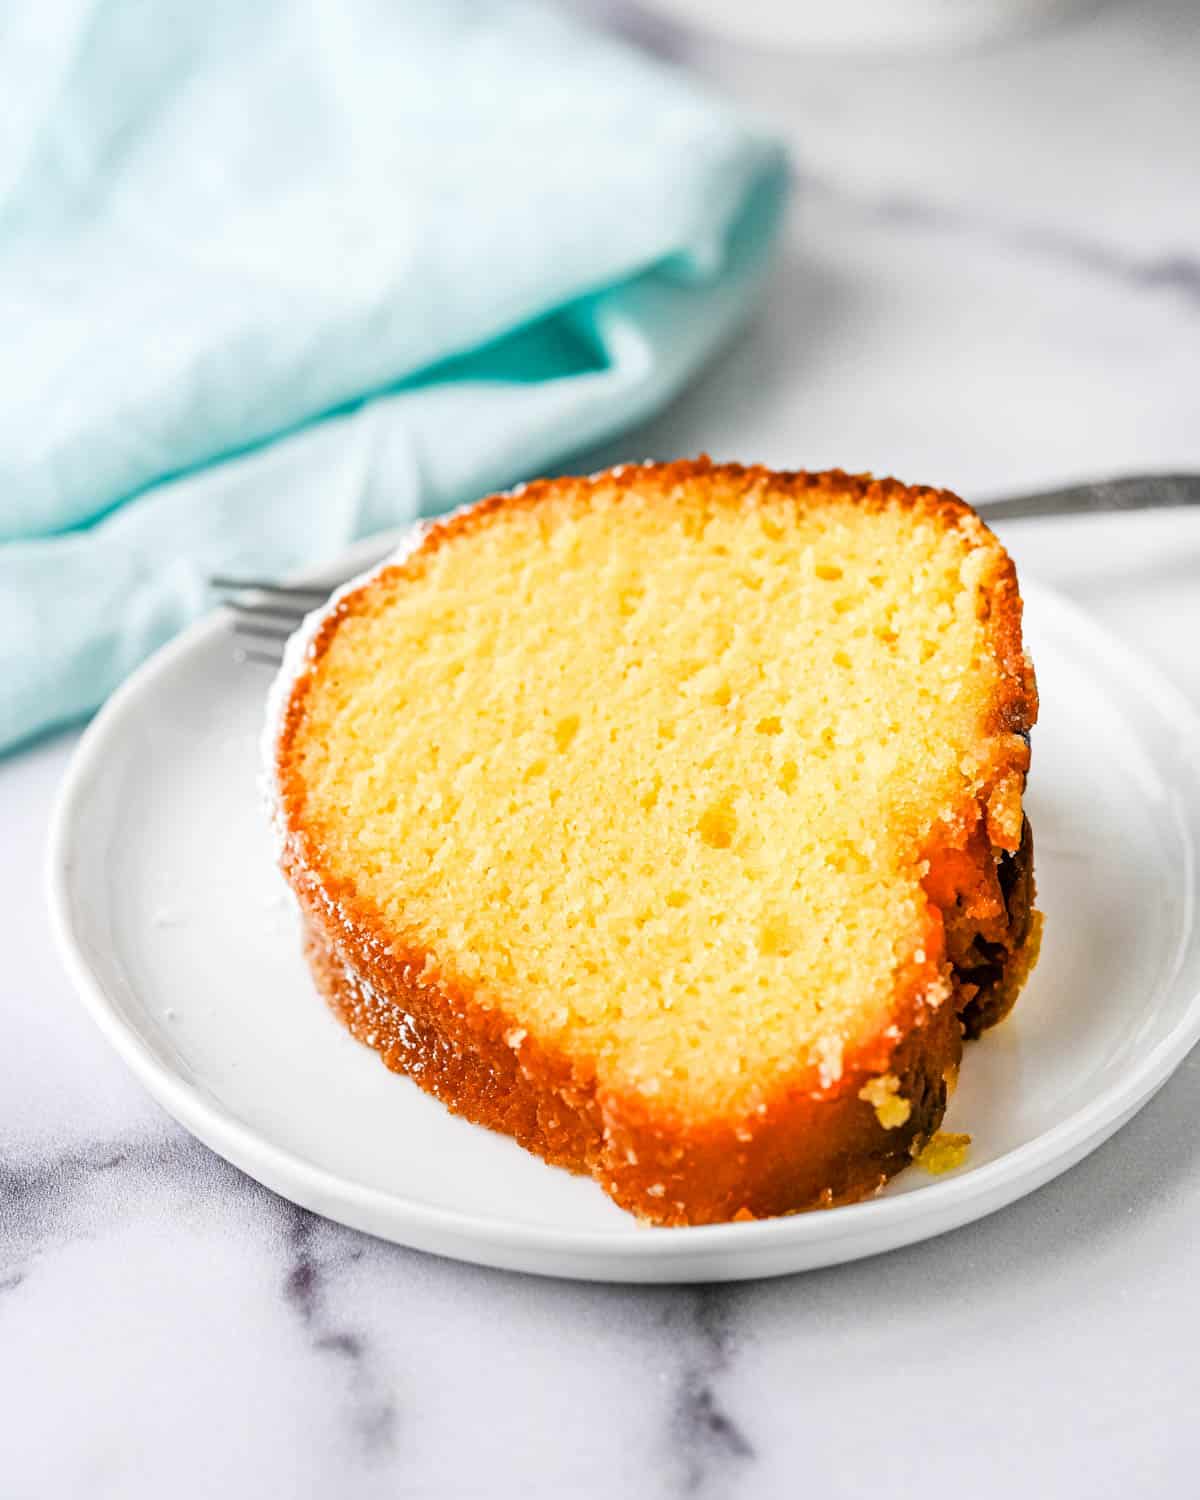 A slice of passion fruit cake.